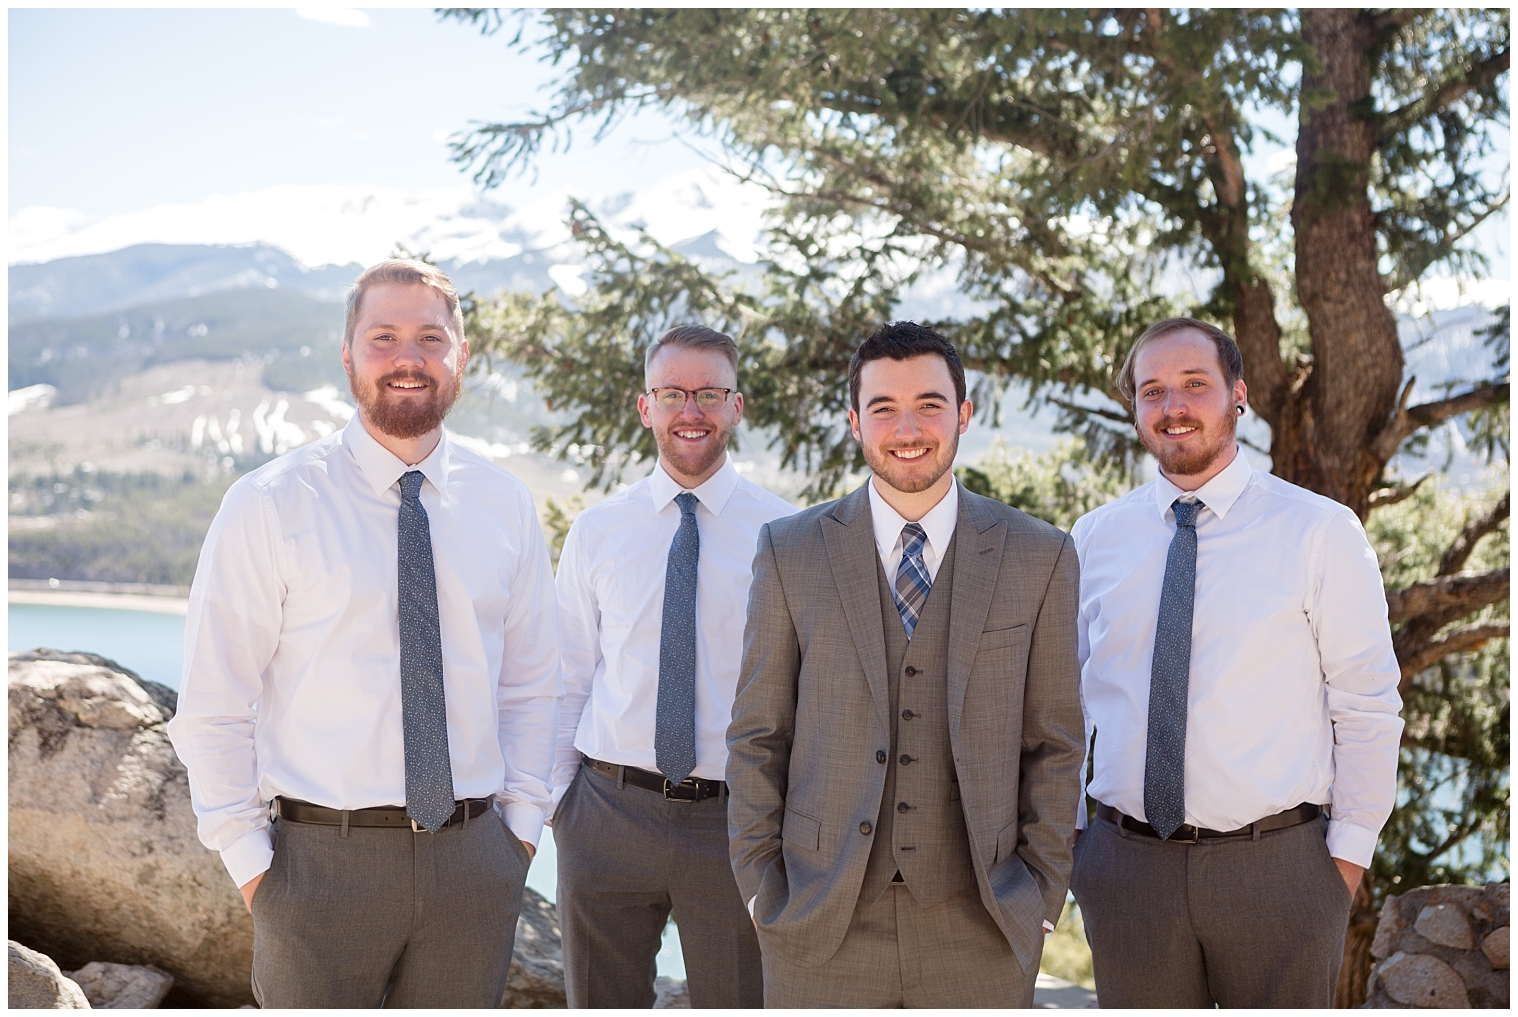 Groom poses with his groomsmen at a Colorado mountain intimate wedding.